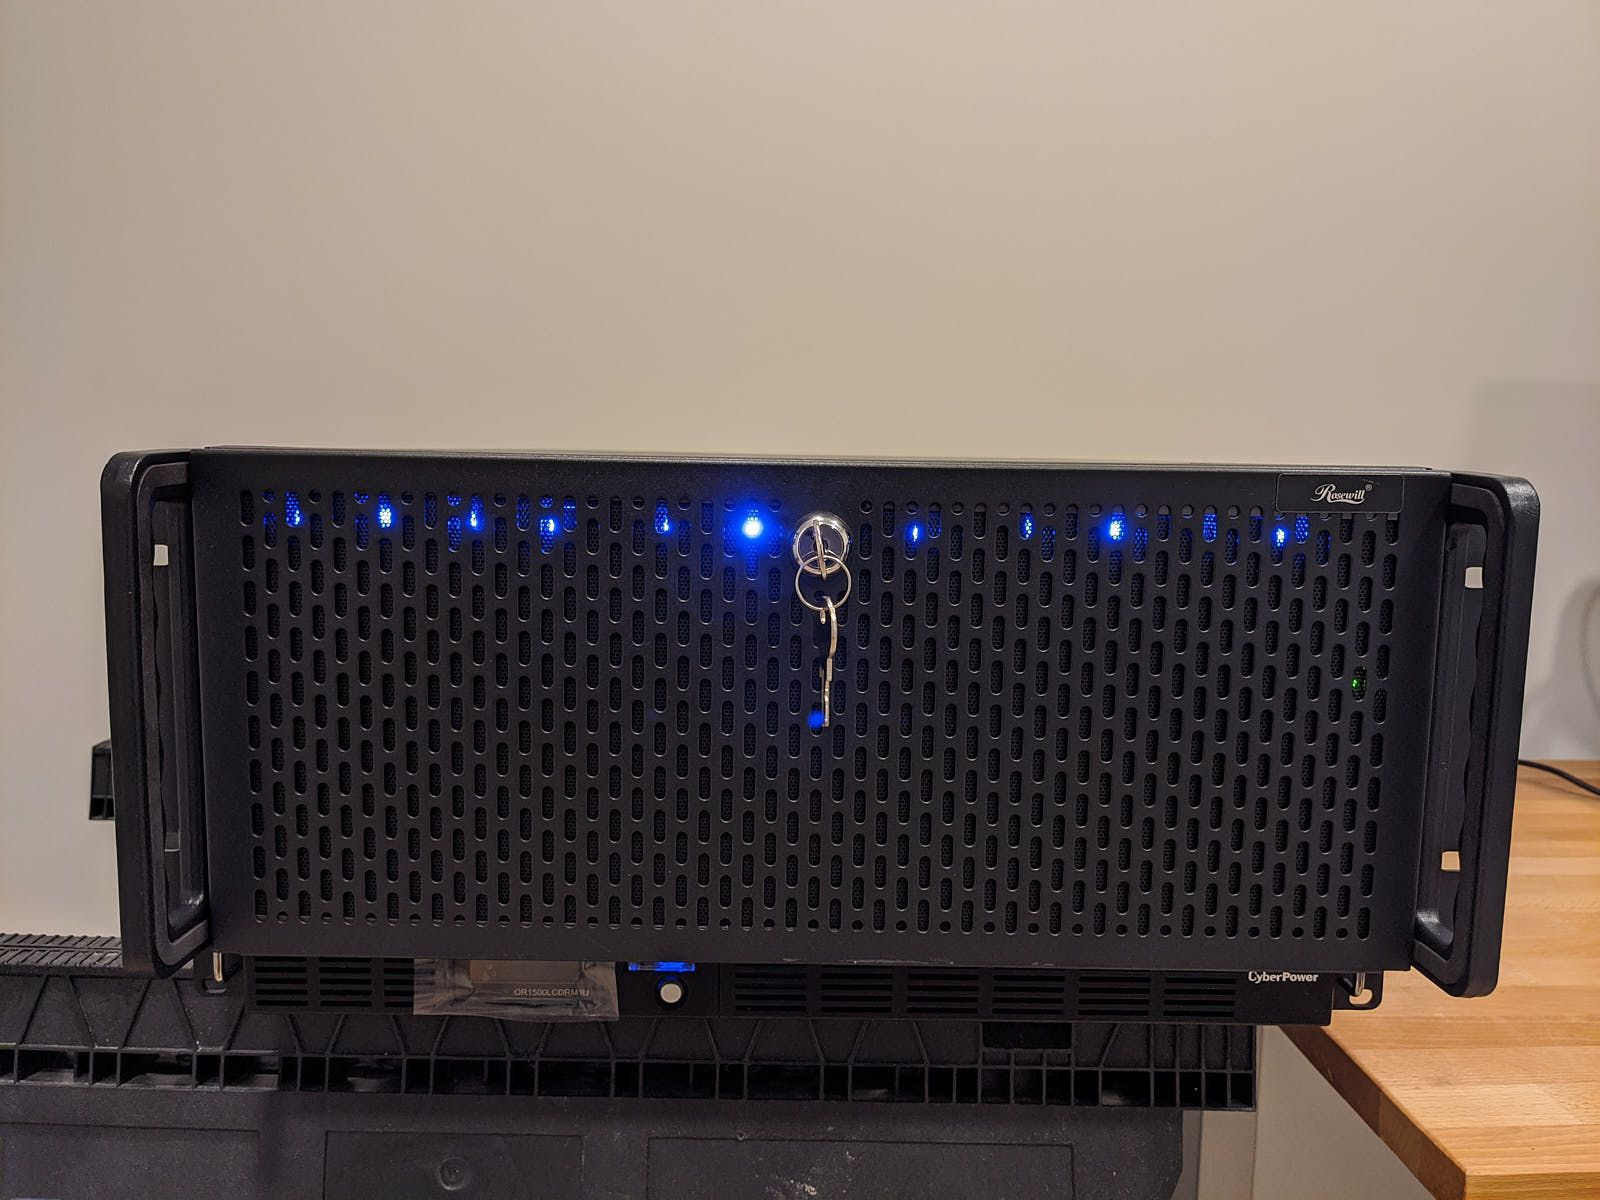 Home NAS with Ubuntu and ZFS